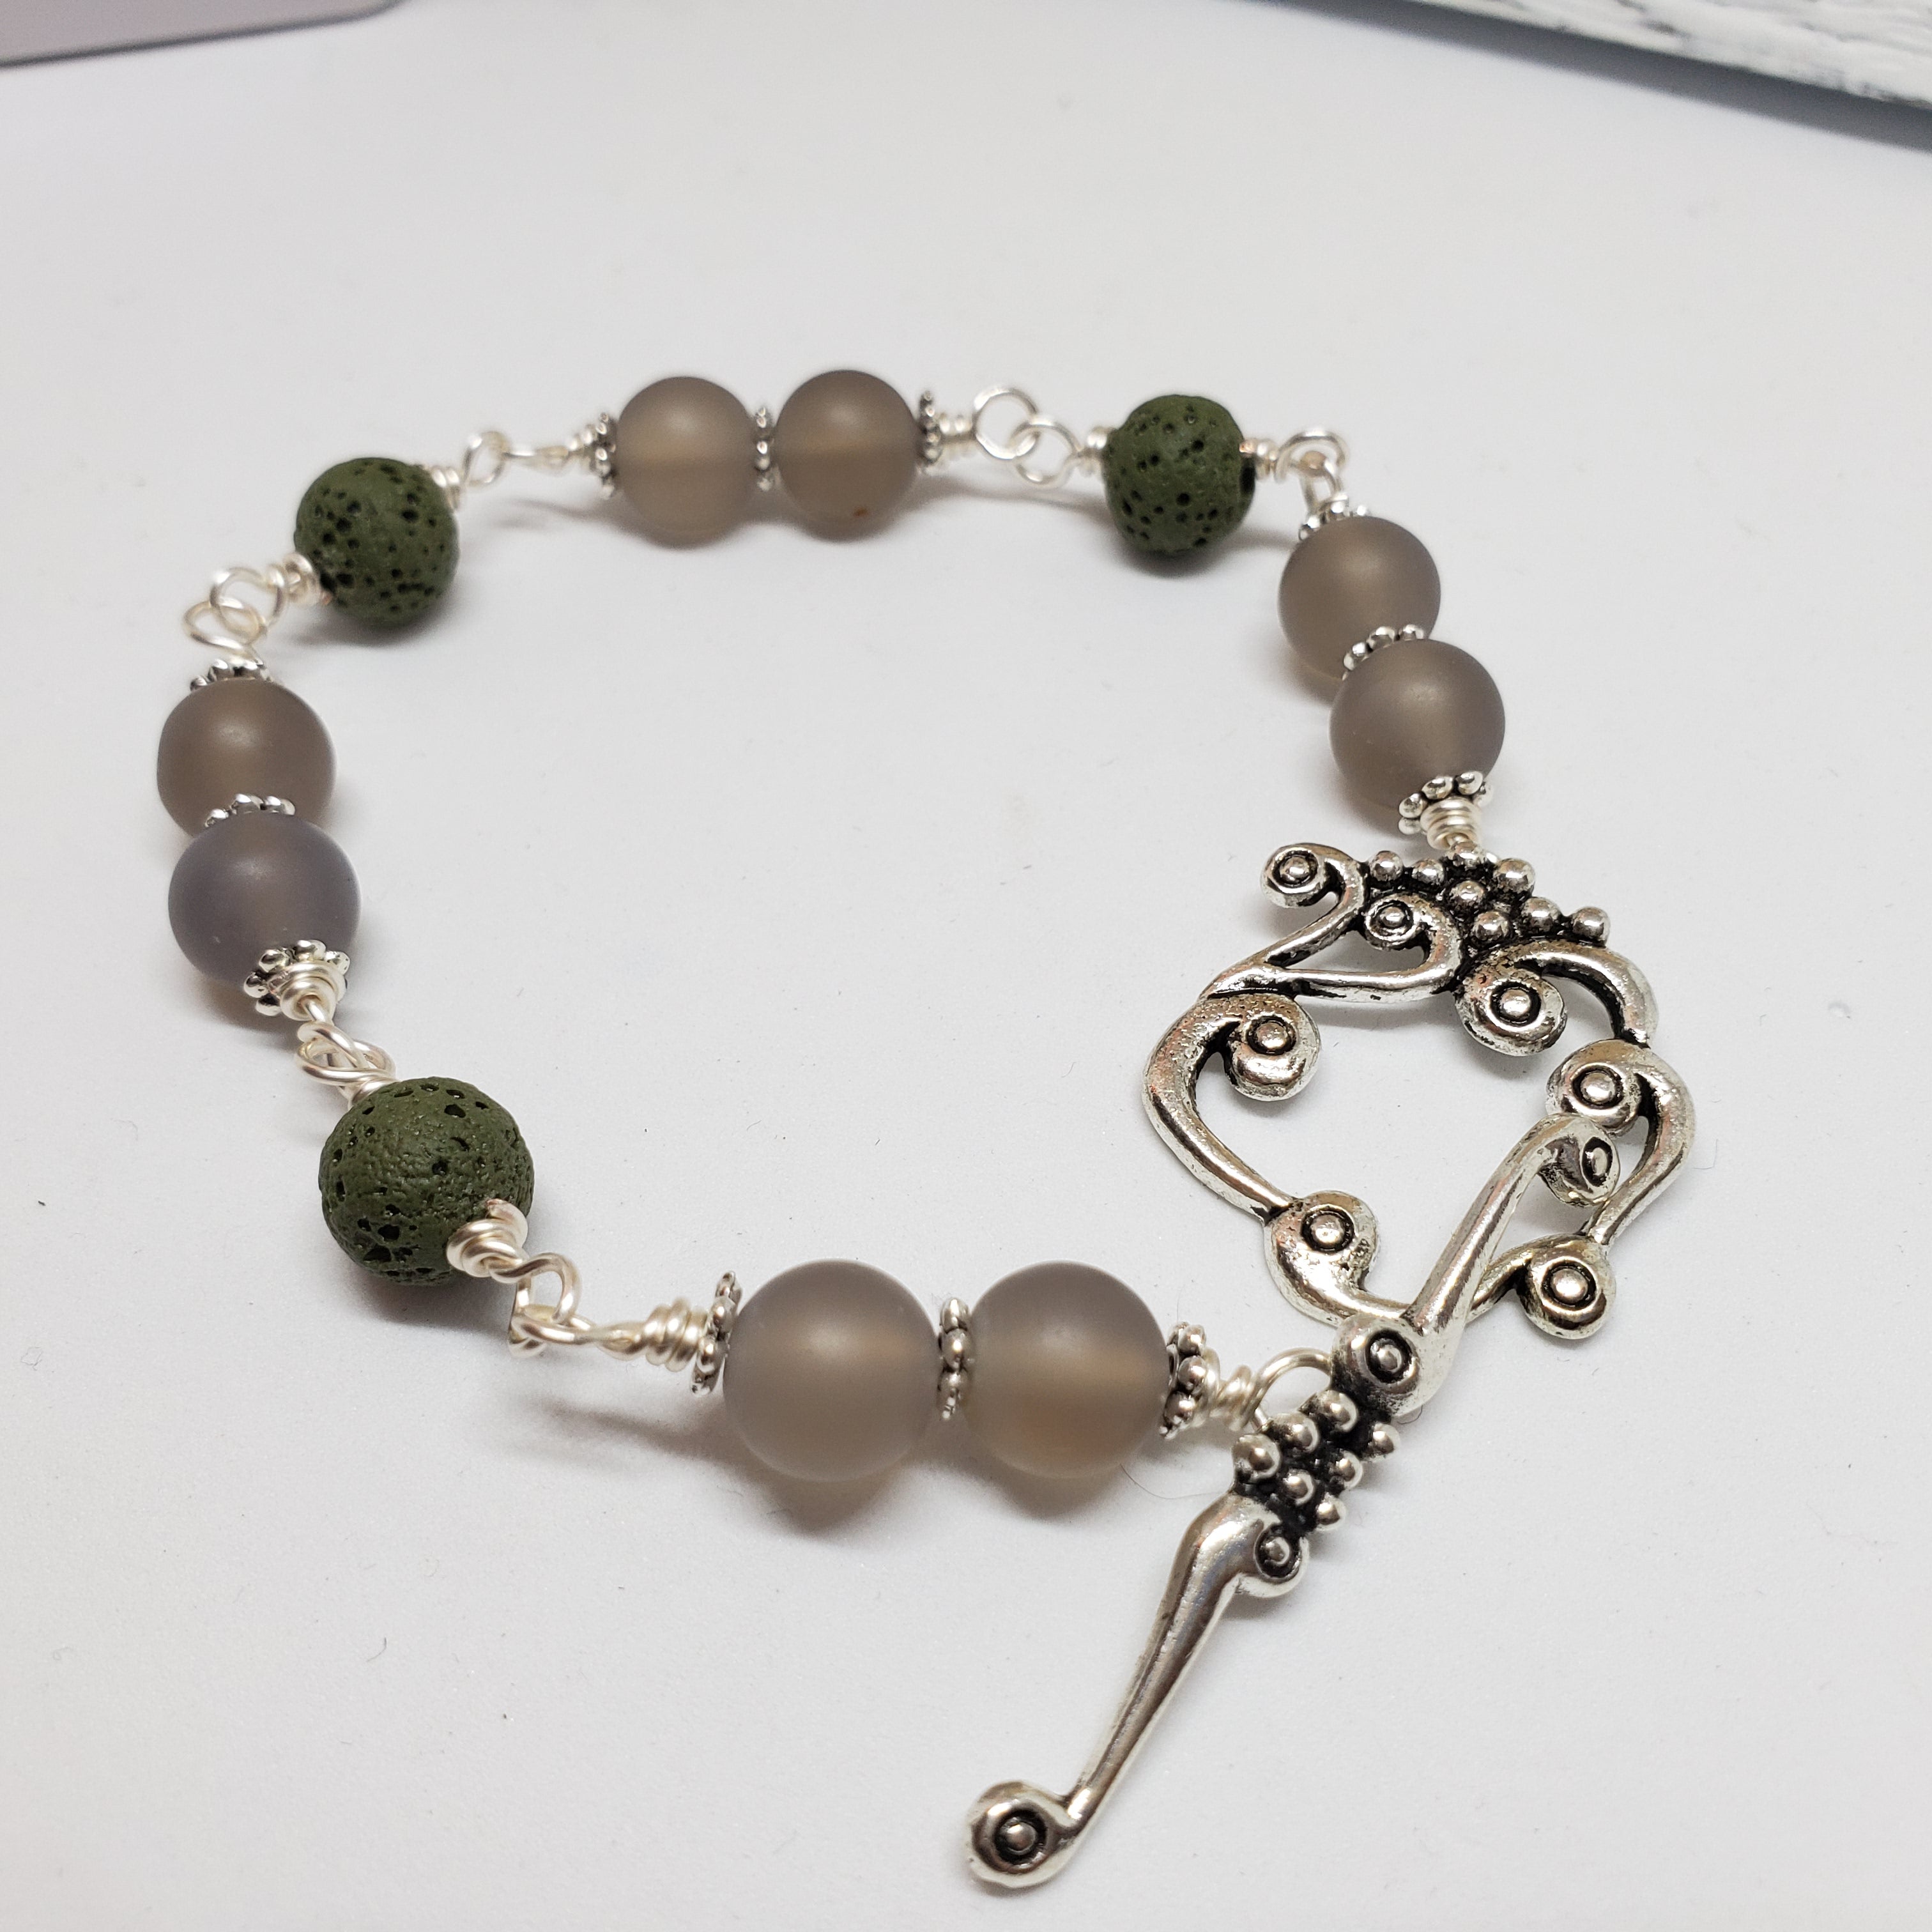 Frosted Grey Agate Diffuser Bracelet - Size Medium